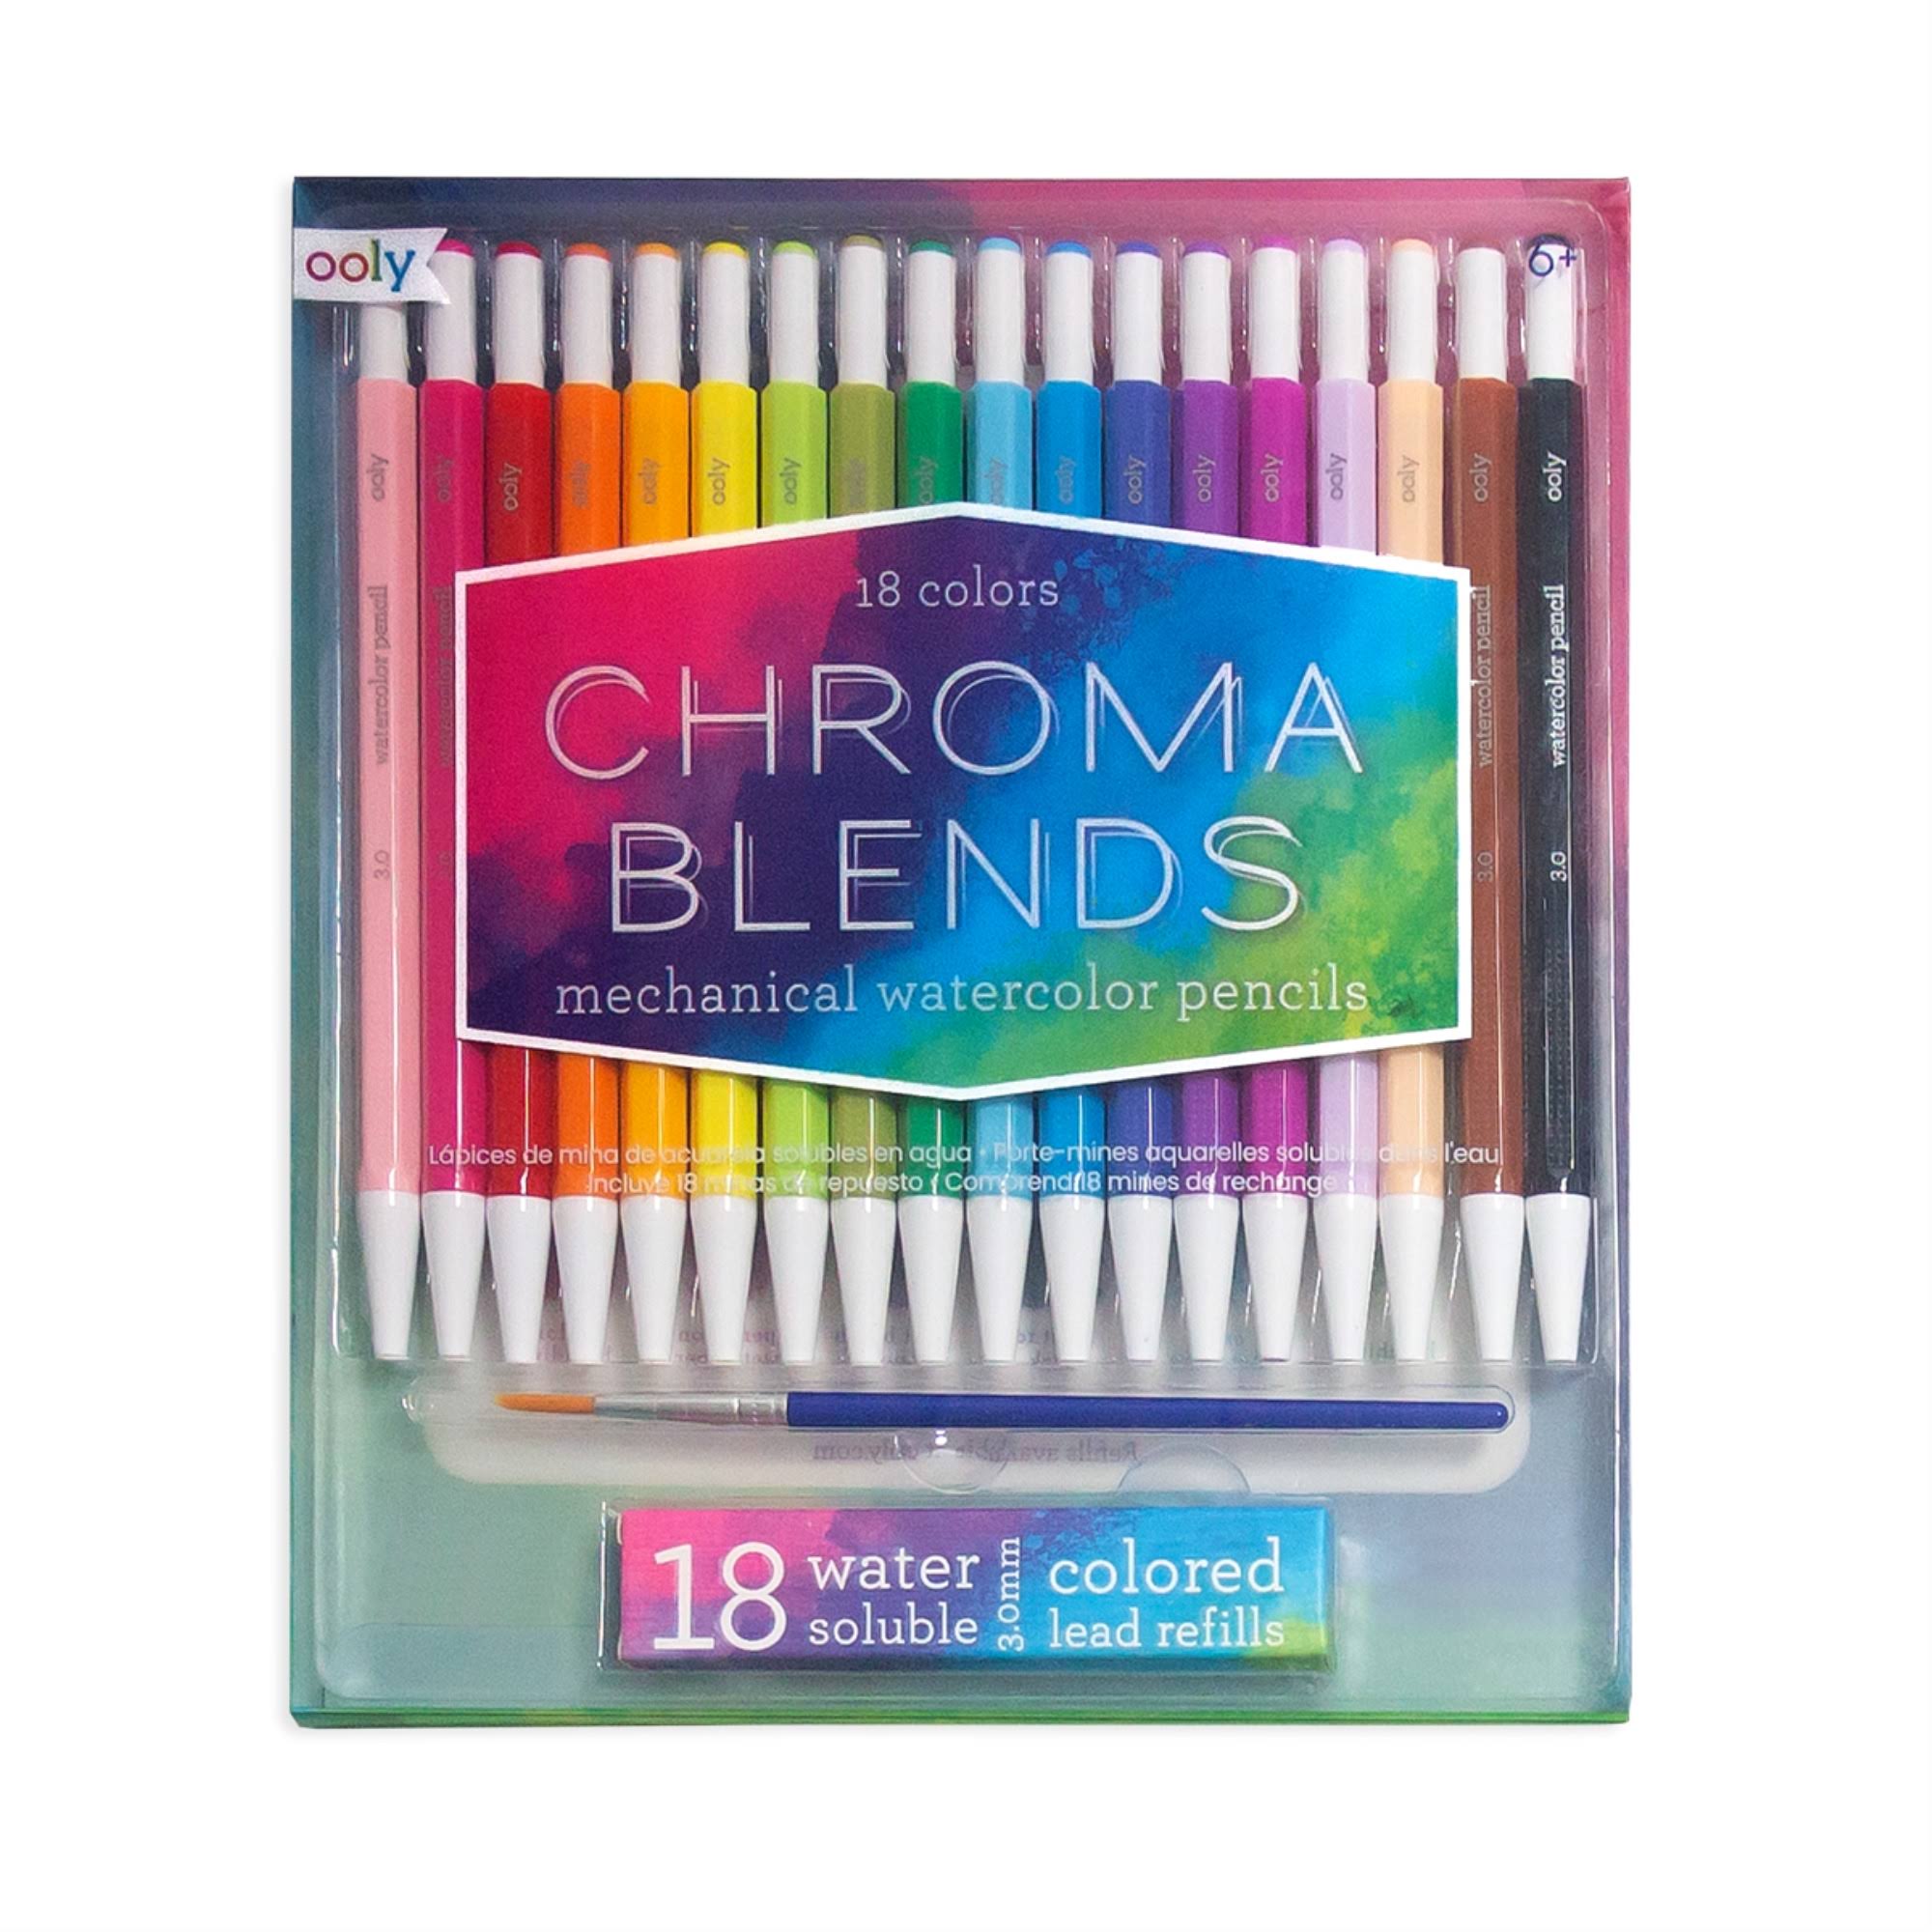 ooly Chroma Blends Mechanical Watercolor Pencils One-Size